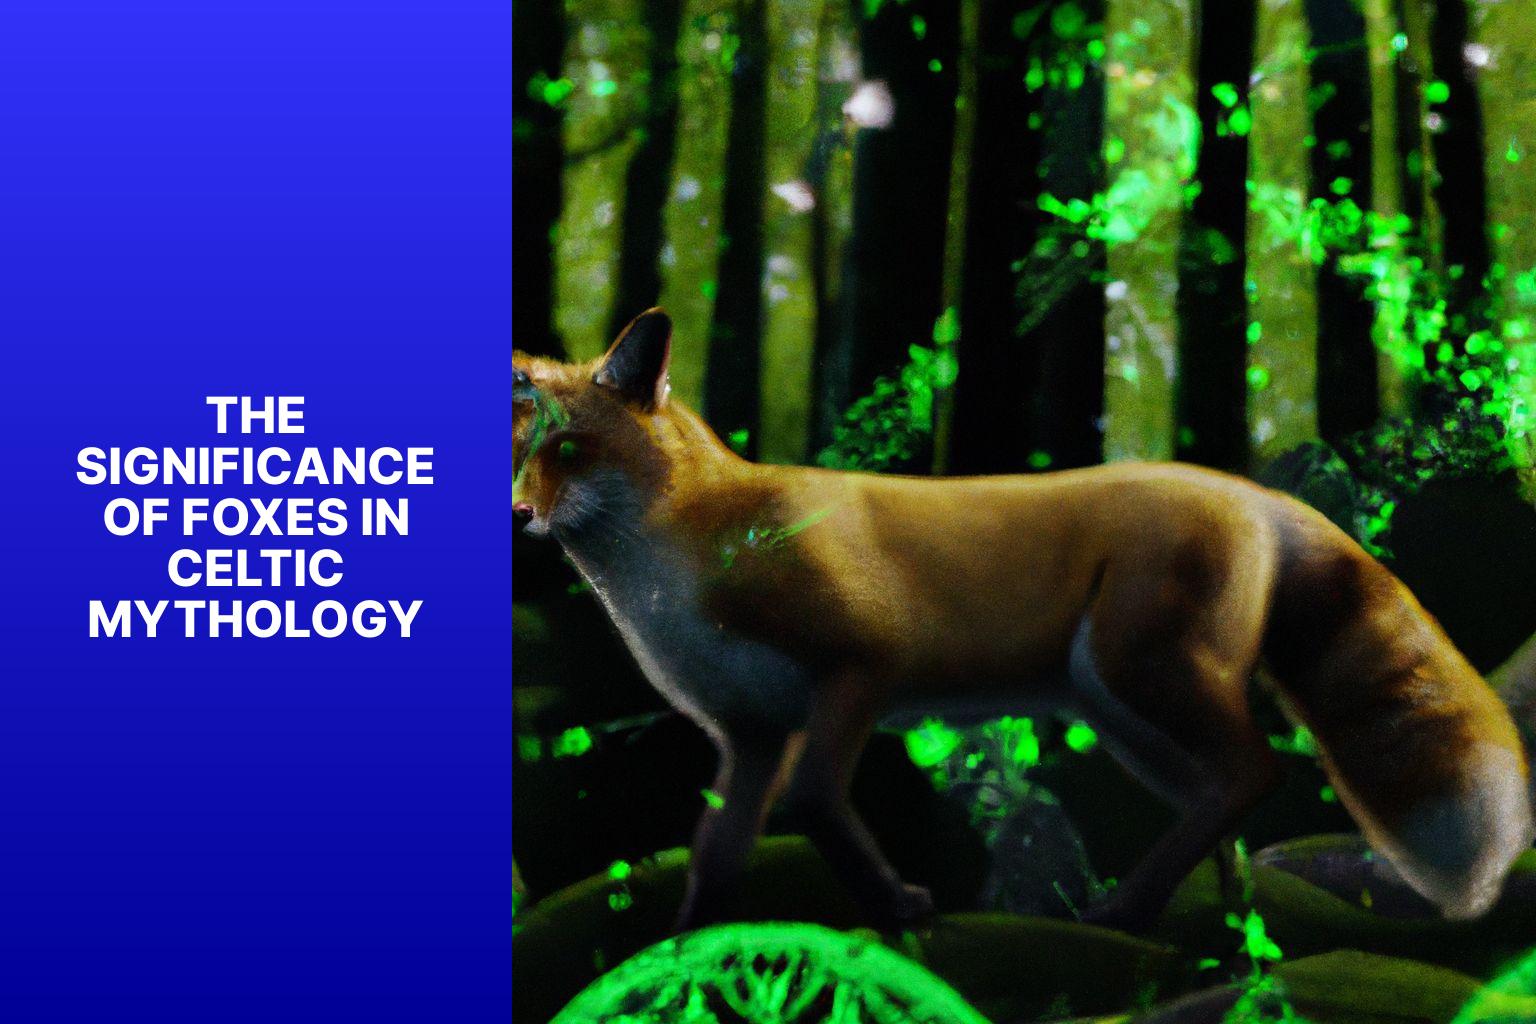 The Significance of Foxes in Celtic Mythology - Fox Myths in Celtic Culture 